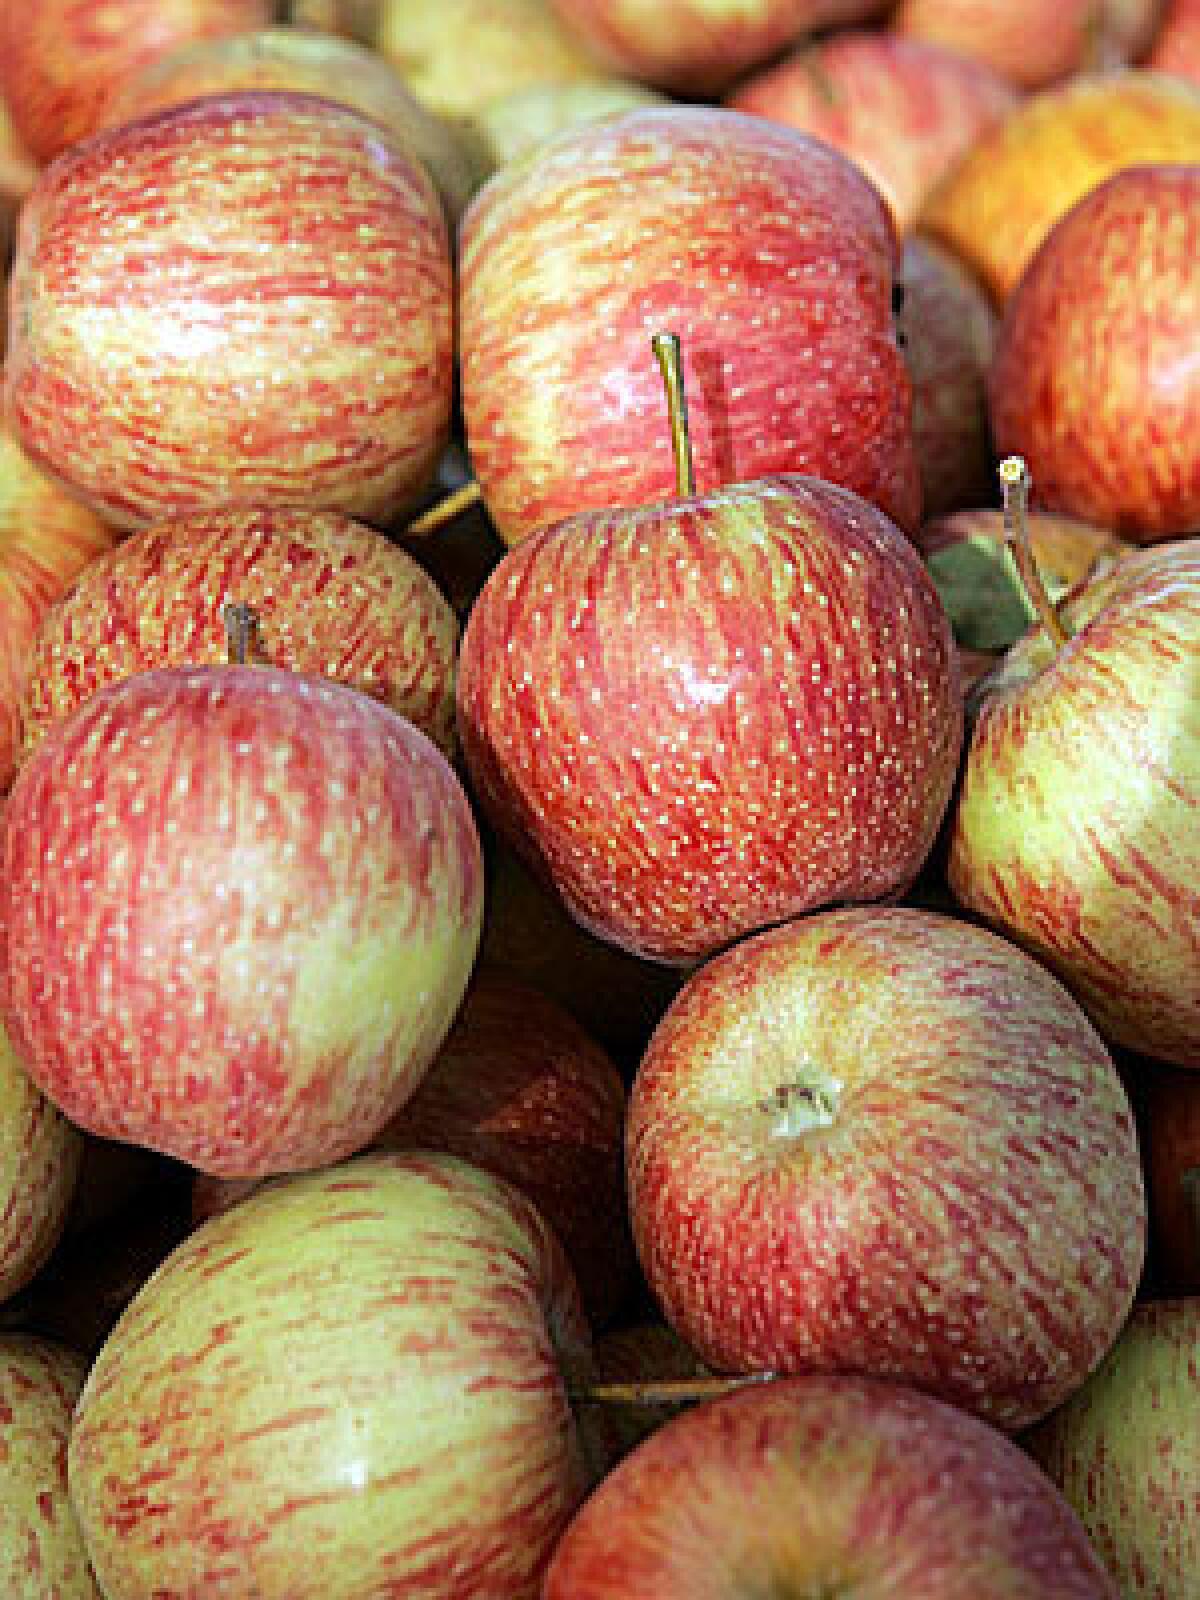 Cameo apples hold their crisp texture well in storage.